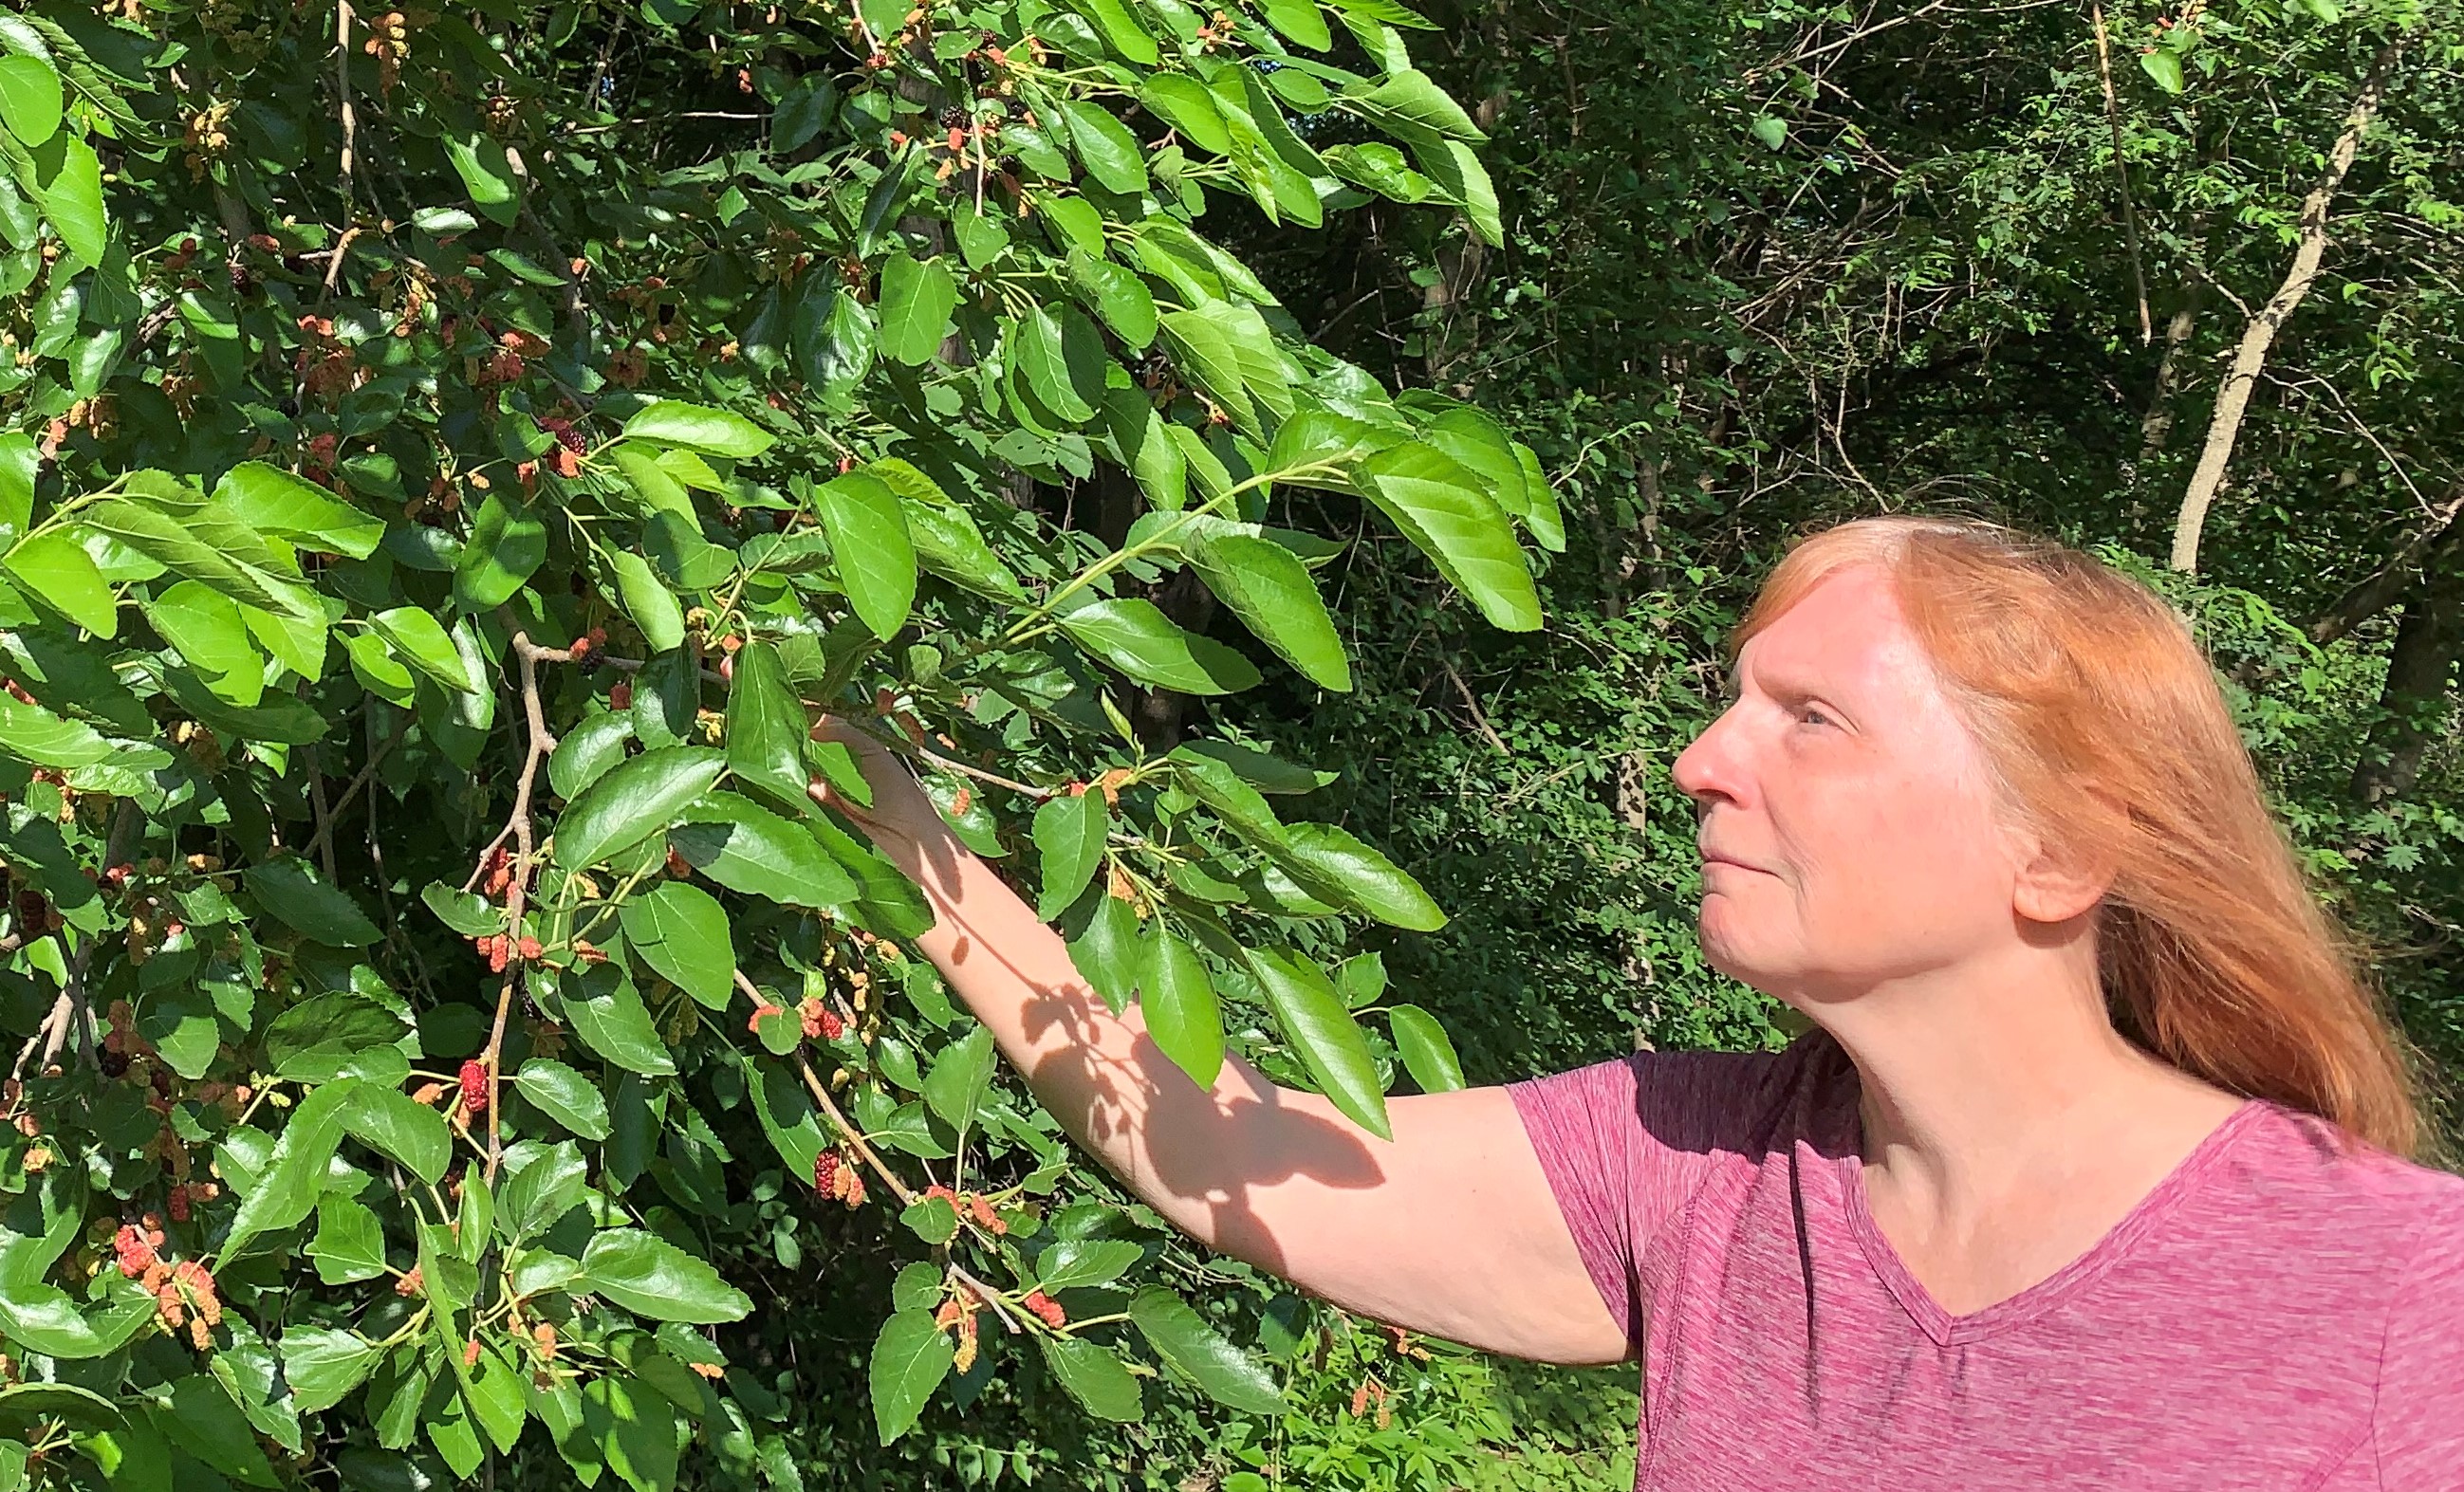 Karen, a white woman with copper hair and a pink shirt, inspects a mulberry tree with pink berries and bright green leaves.